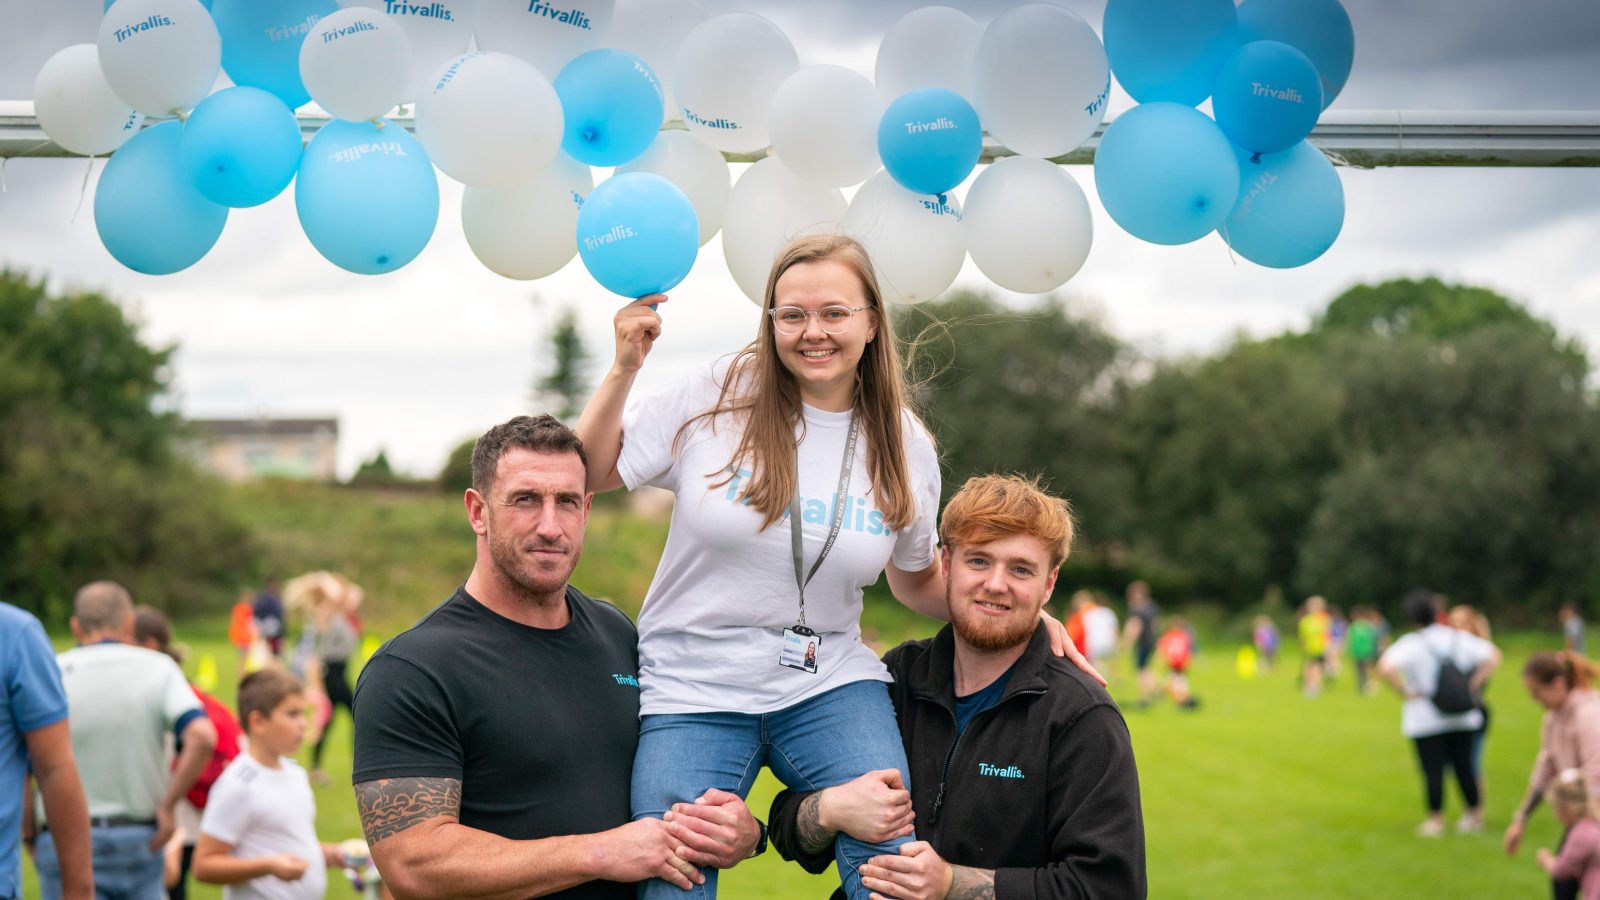 Trivallis Housing Landlord Wales Two men lifting a woman on their shoulders at an outdoor RCT housing event with blue and white balloons in the background.